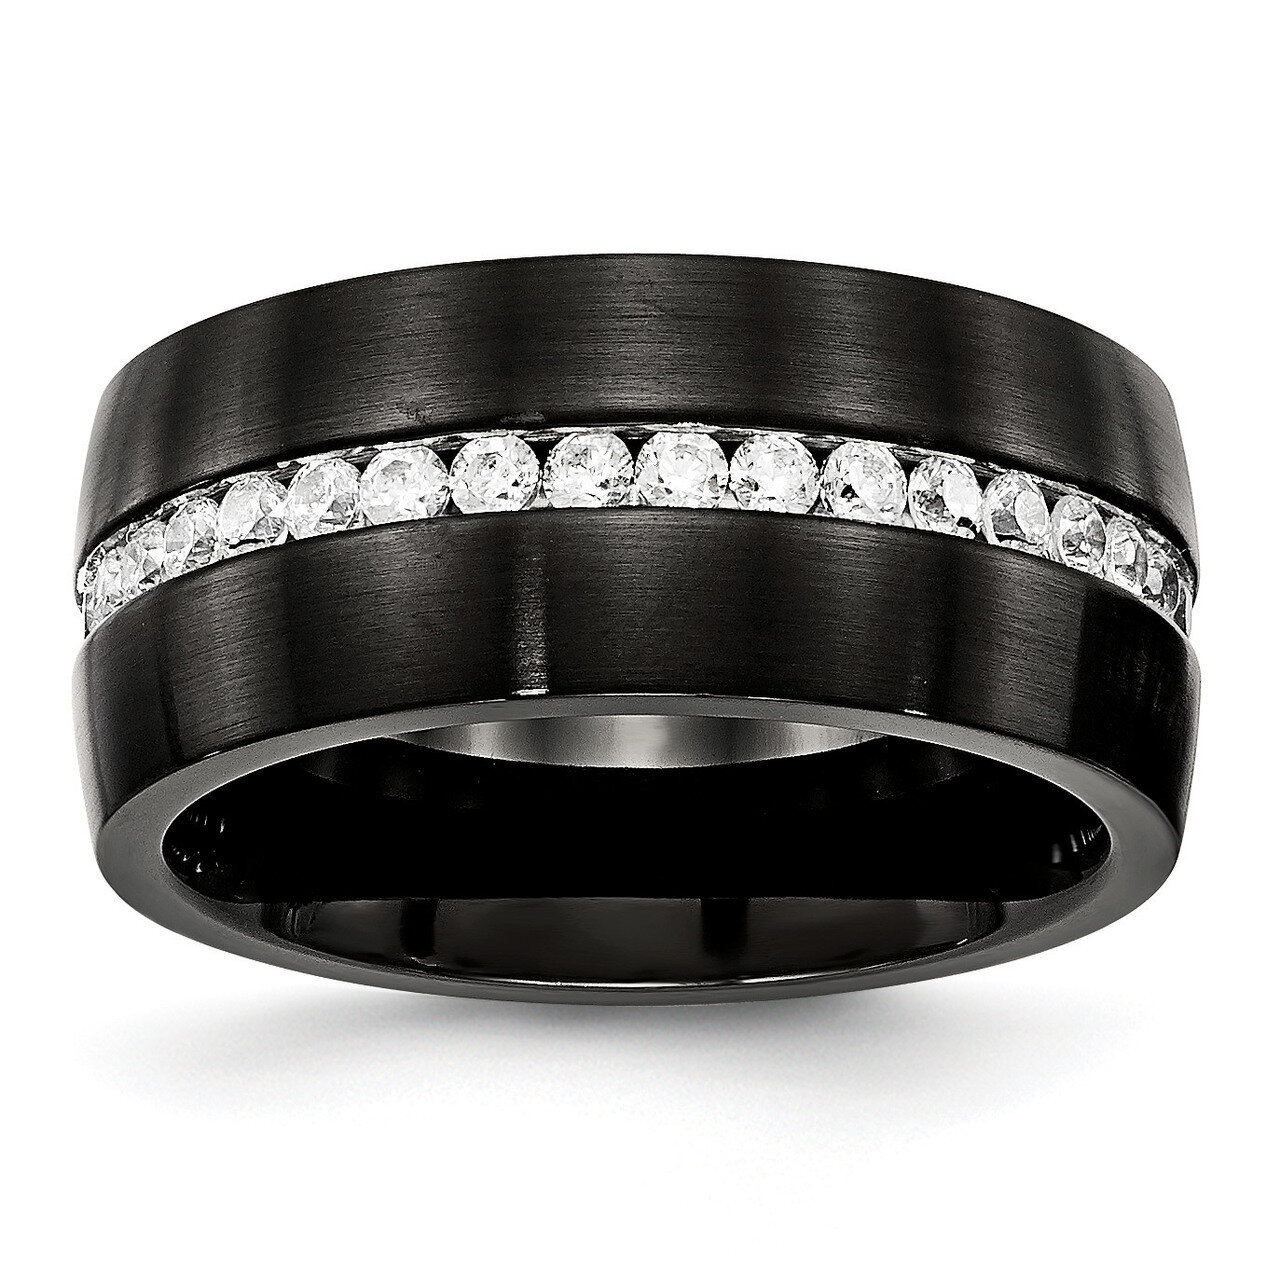 Black IP Diamond CZ Ring Stainless Steel Brushed and Polished SR572